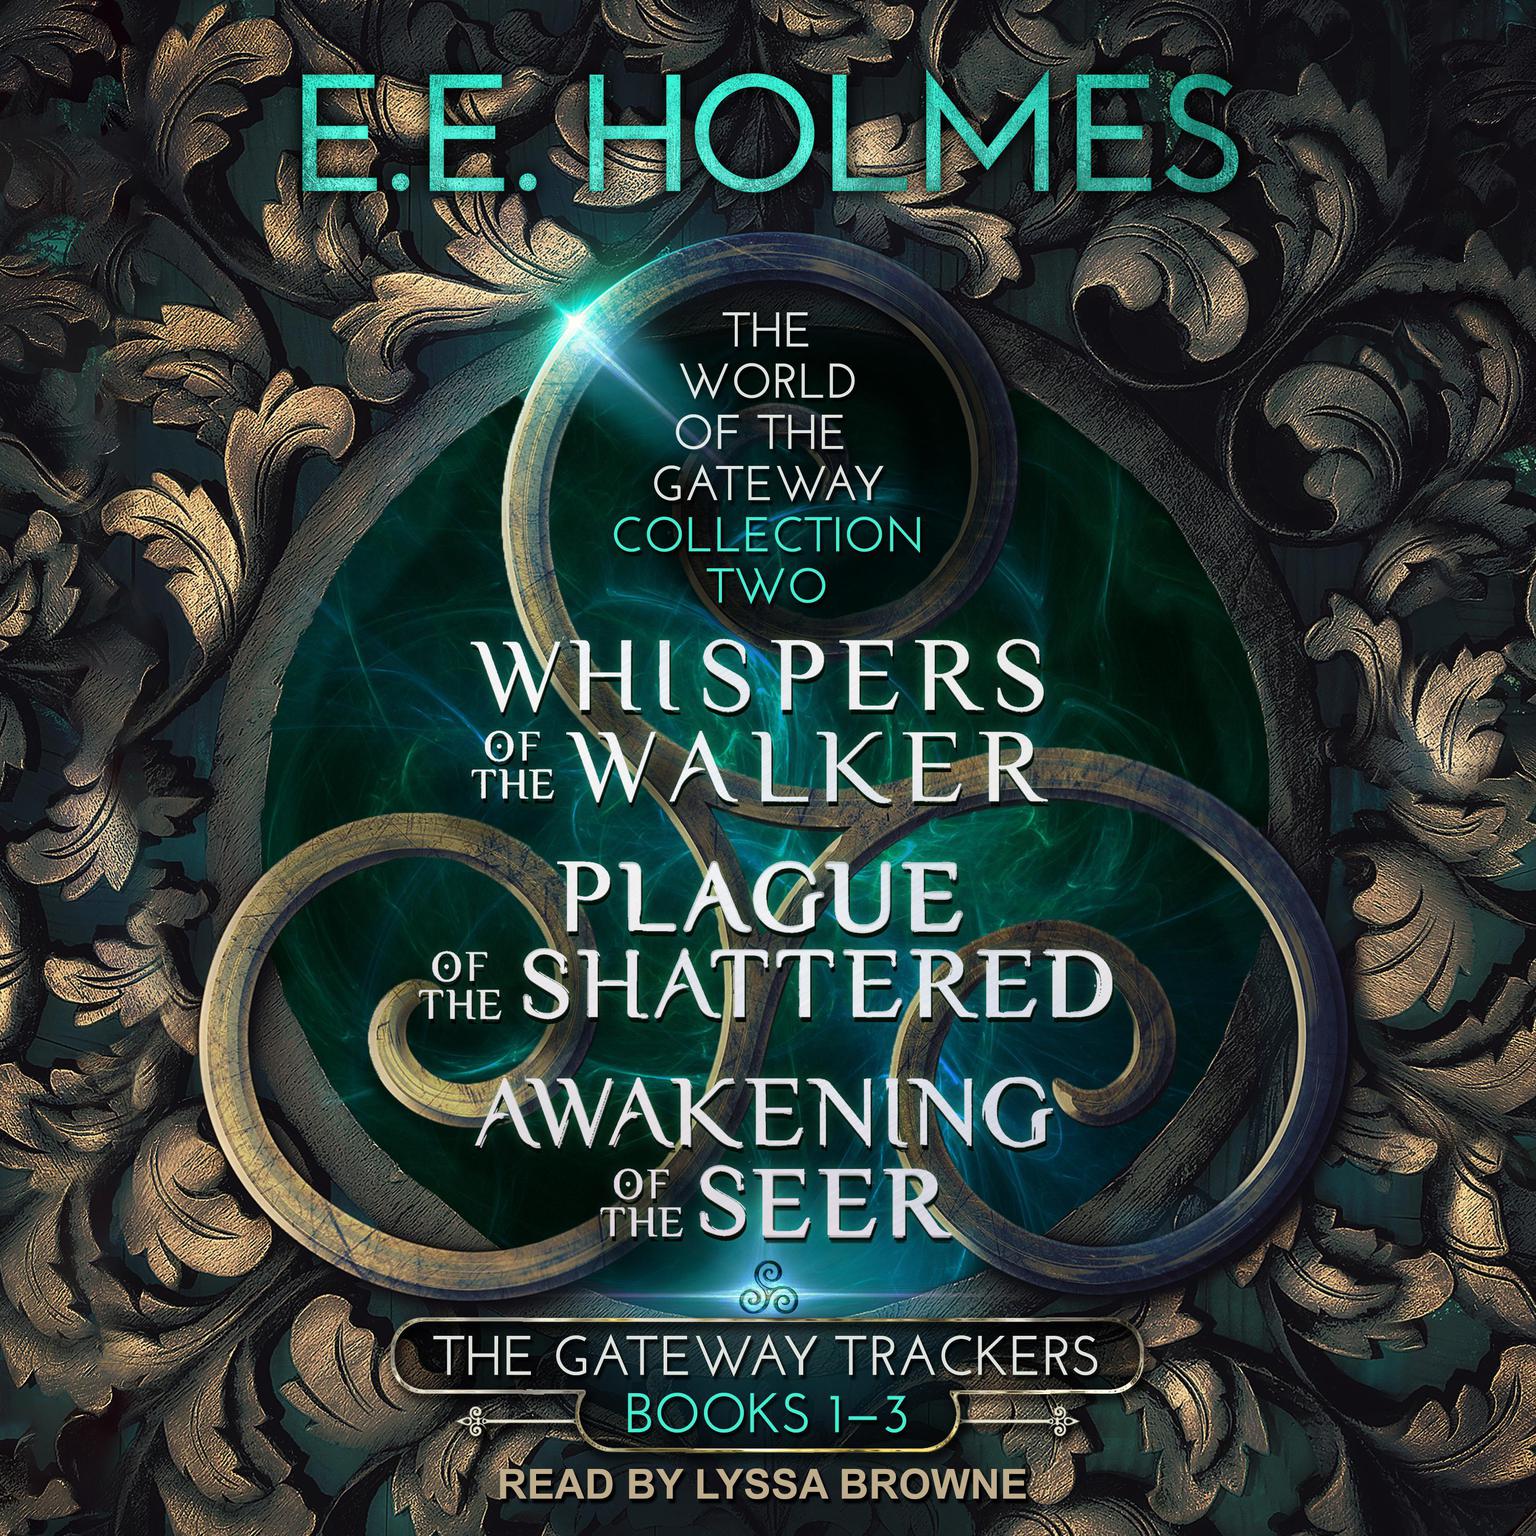 The World of The Gateway: The Gateway Trackers Books 1-3 Audiobook, by E. E. Holmes